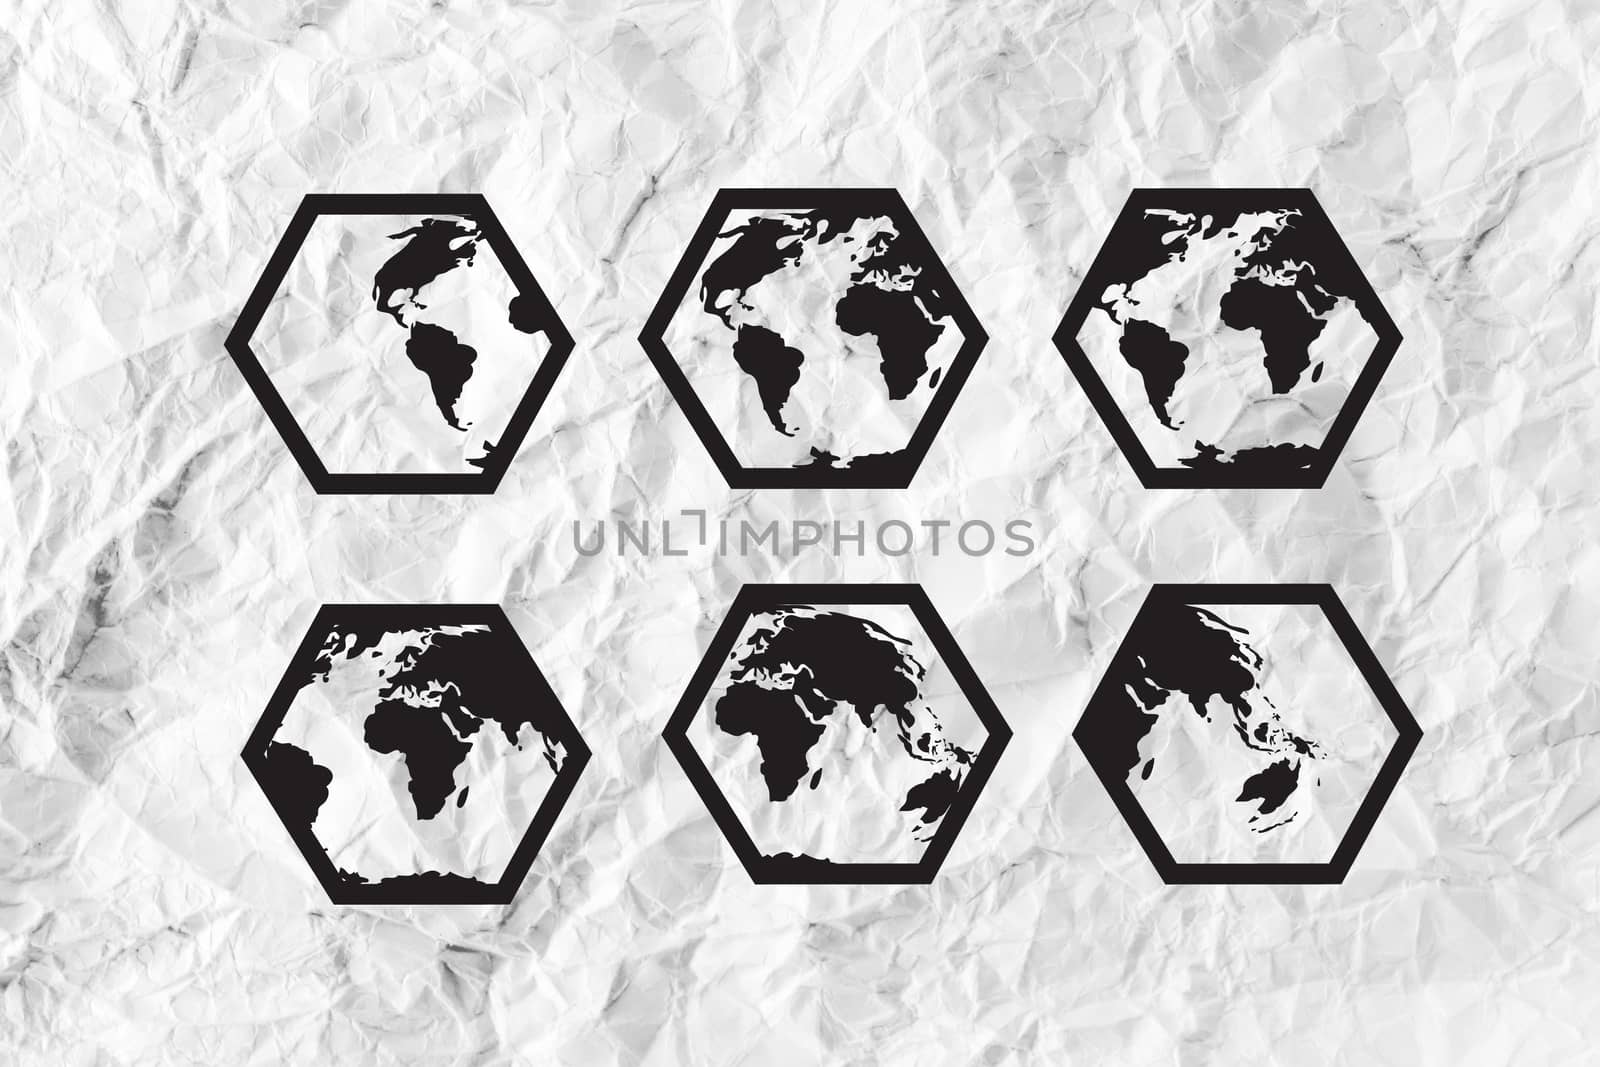 Globe earth icons themes idea design on crumpled paper by kiddaikiddee